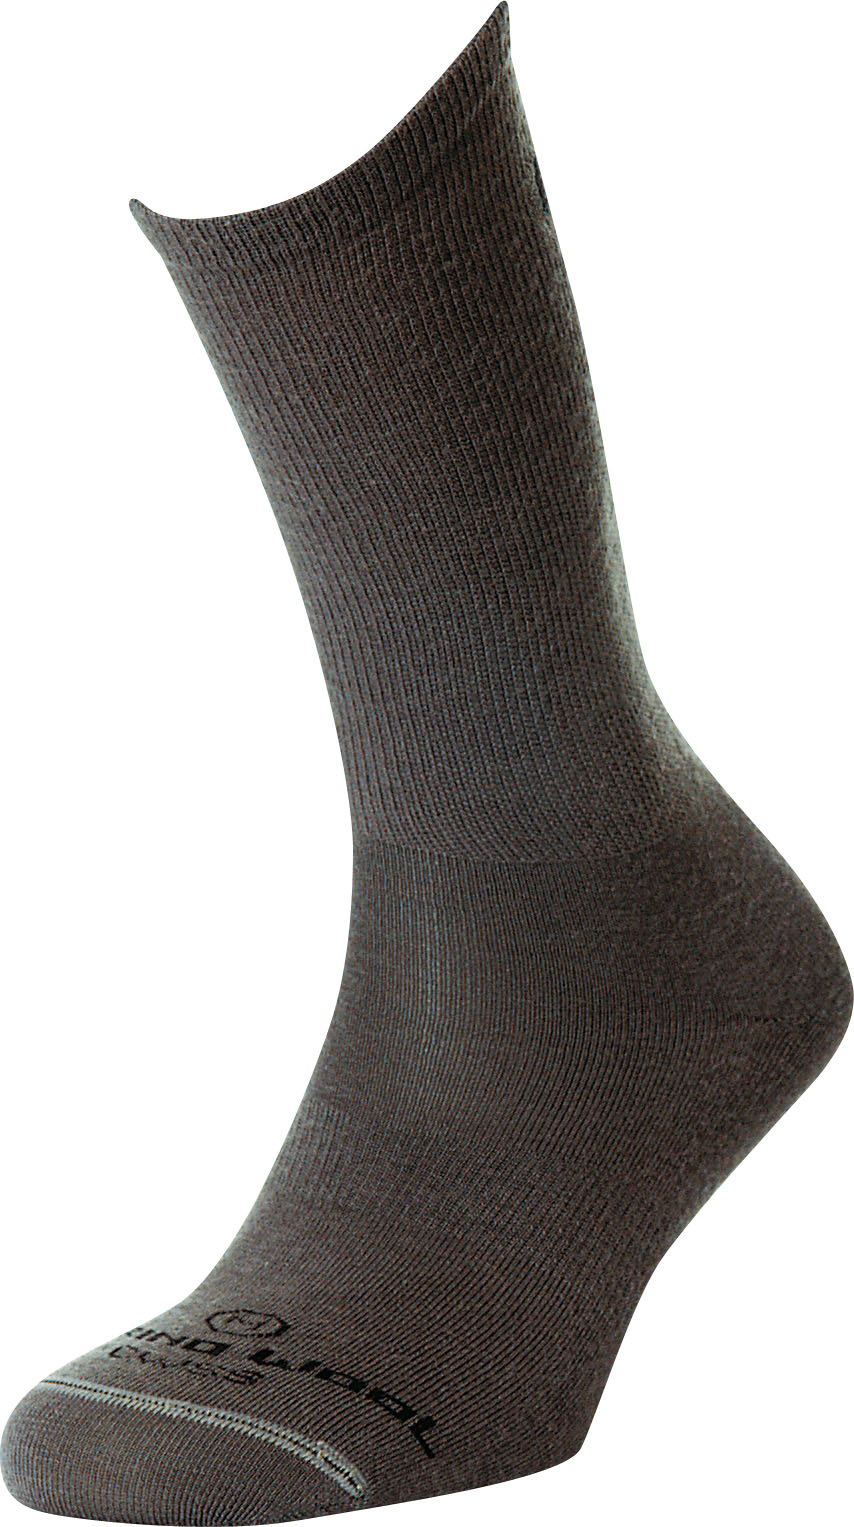 Image CWSS - Cold Weather Socks System - Brown - XL